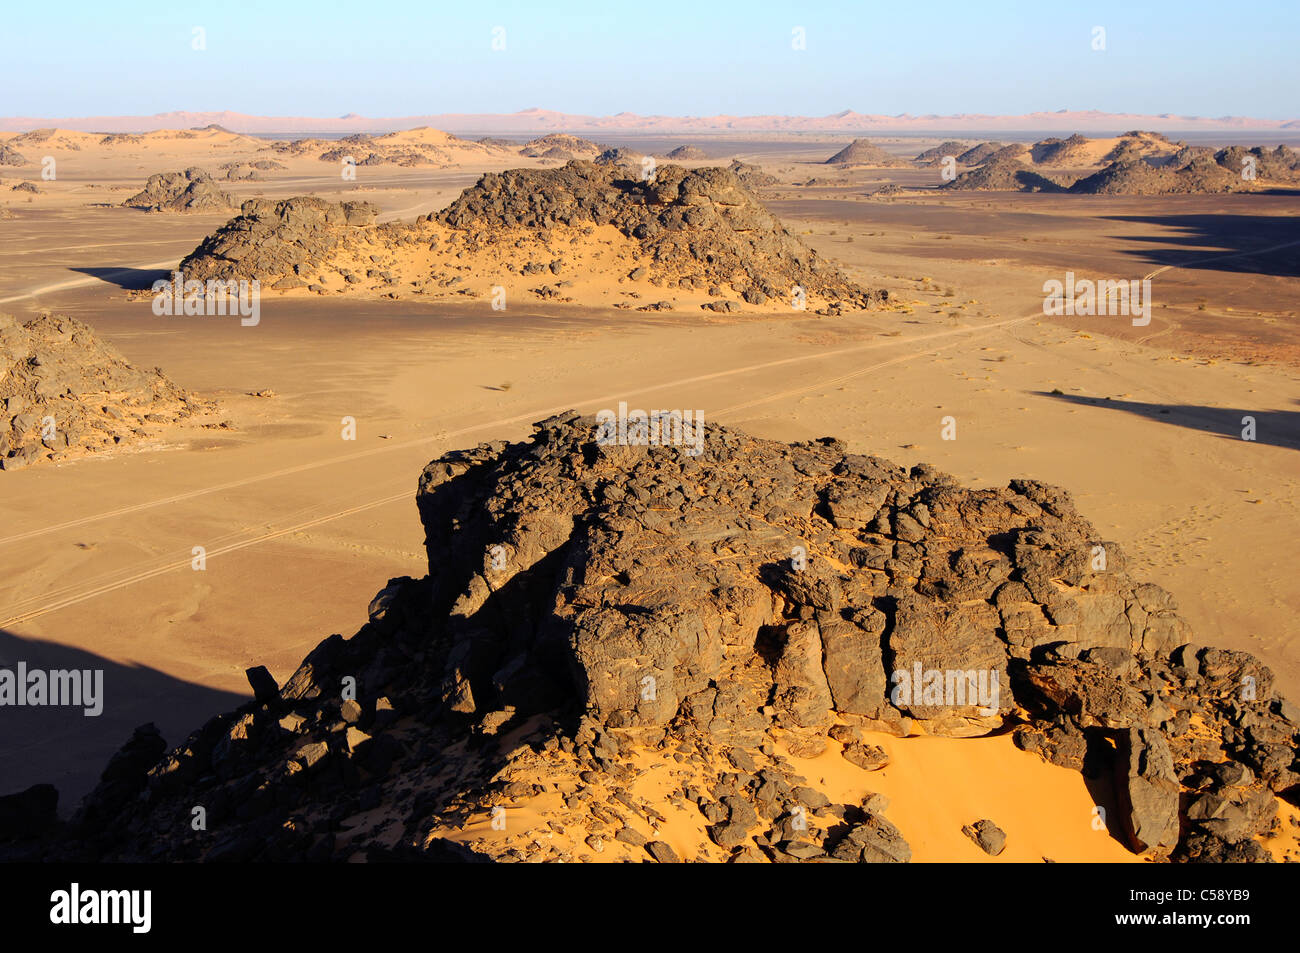 Desertscape with eroded rock hills in the Acacus Mountains, Sahara desert, Libya Stock Photo